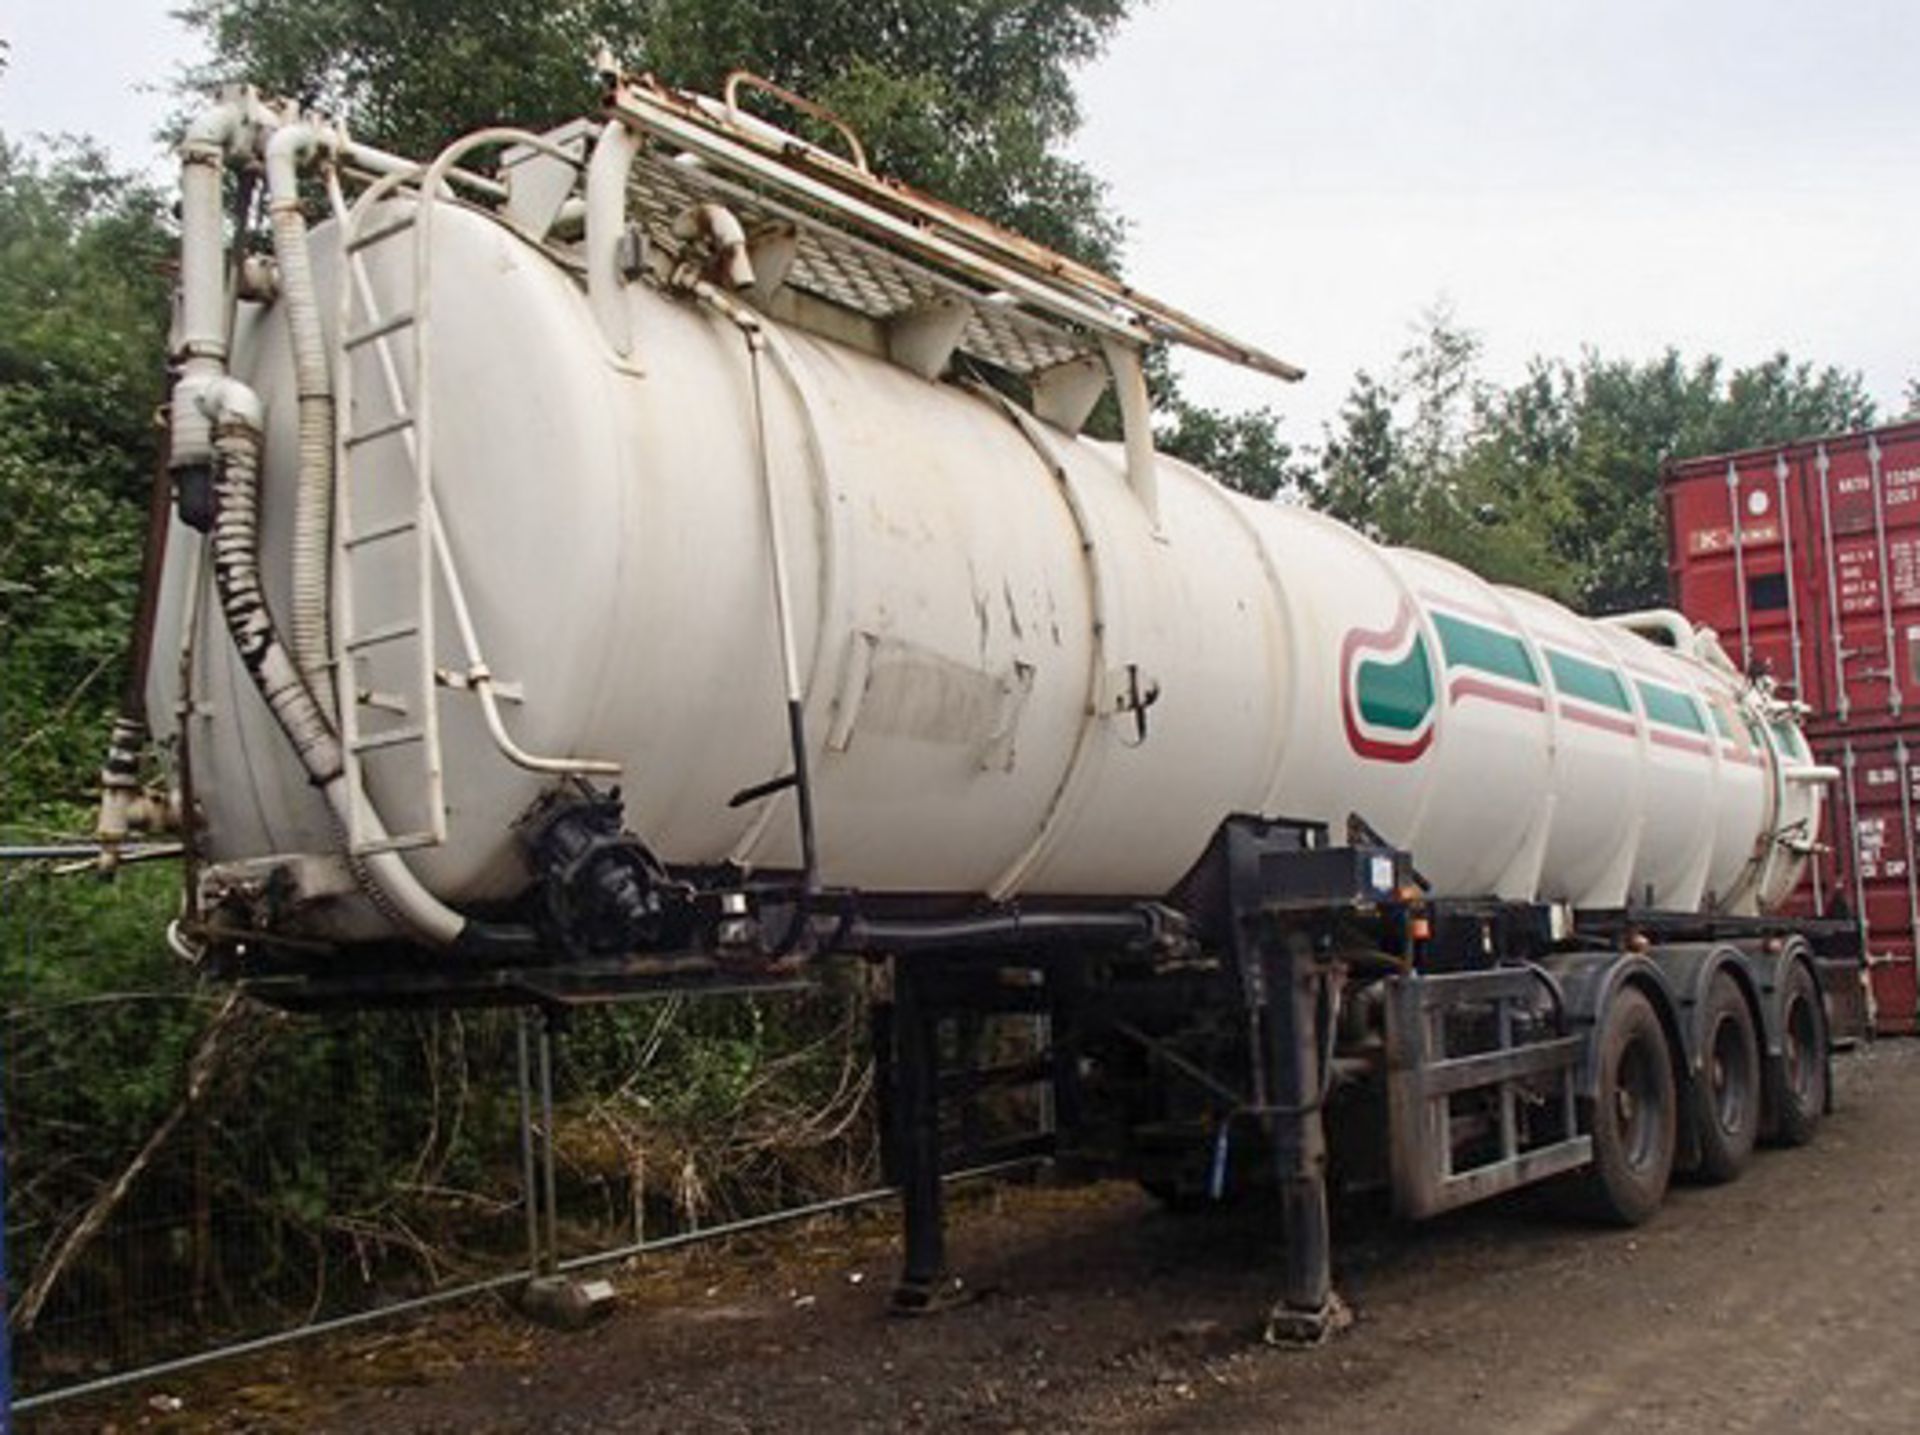 1994 VALLELY SDCLT72C TANKER, CHASSIS NO - SDCTA32R3SDC16720, 3 AXLES, GVW (TONNES) 34000, TESTED UN